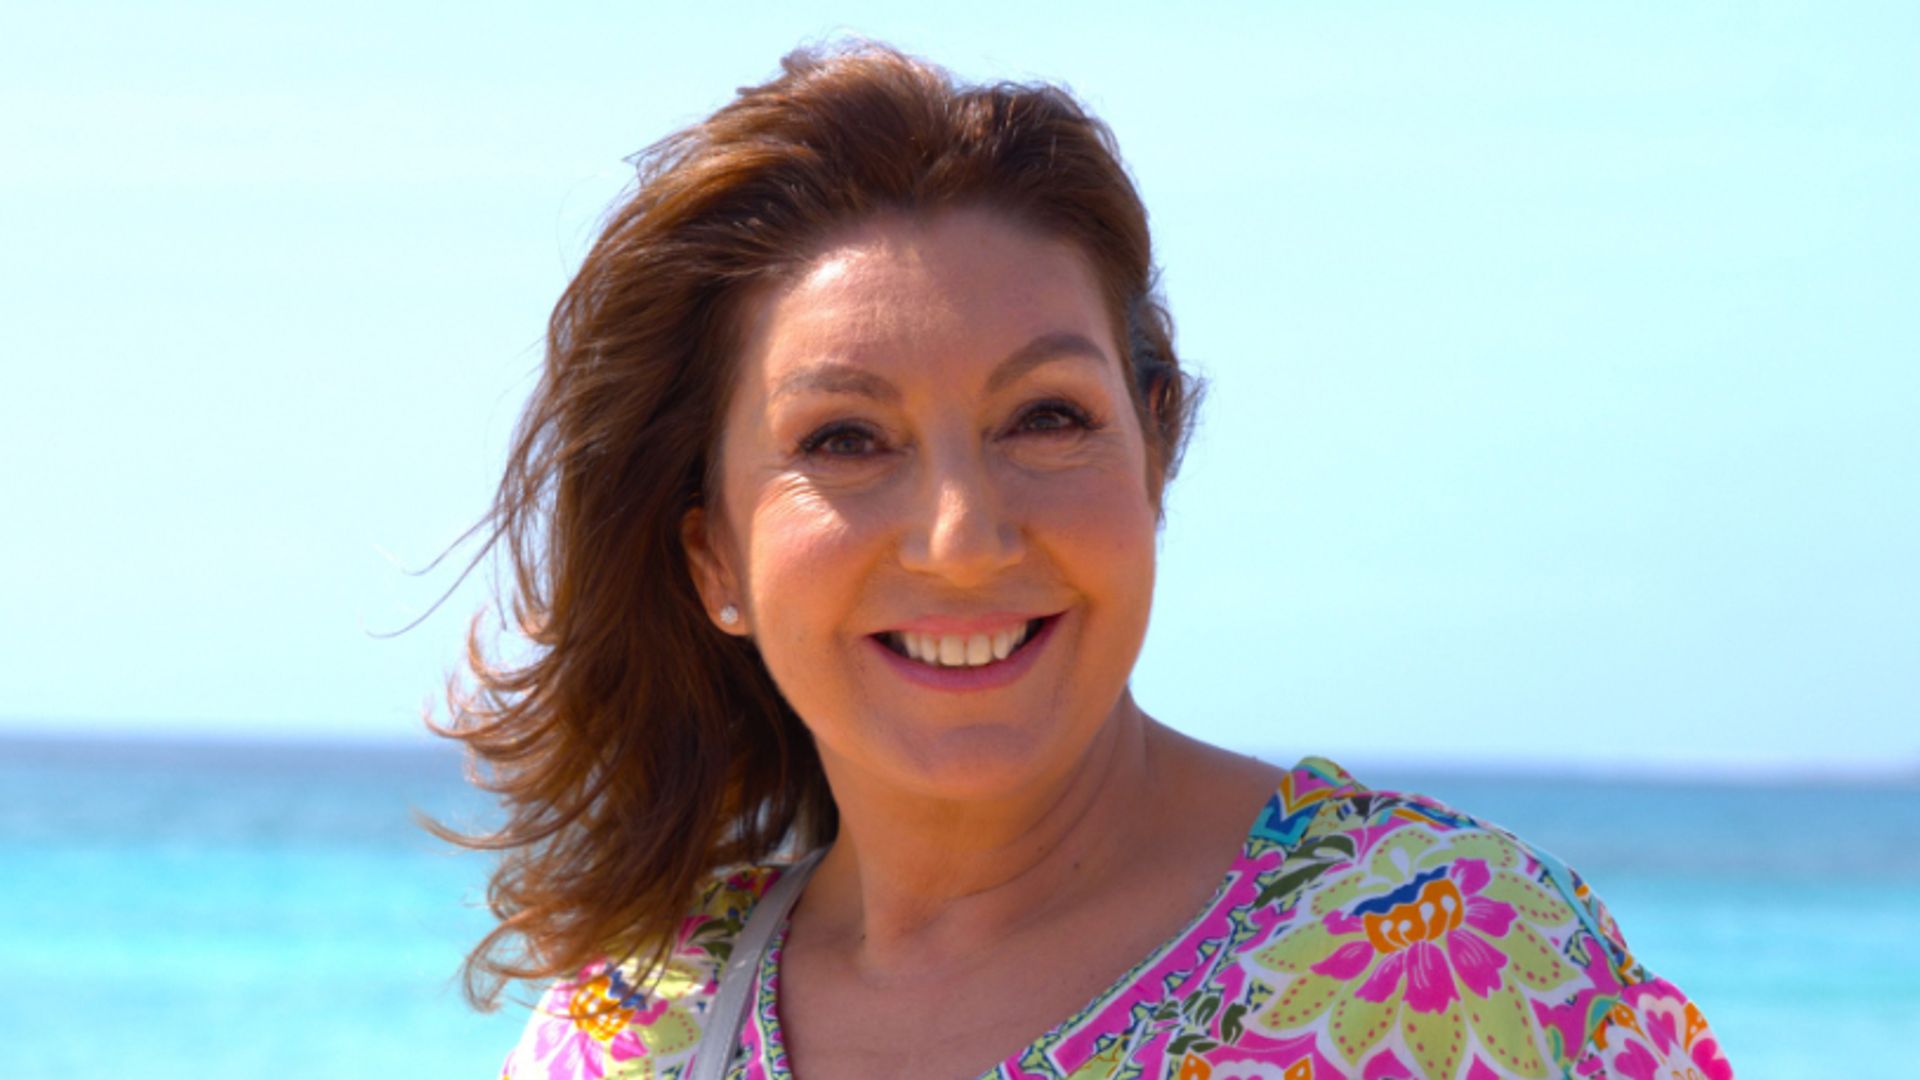 Jane McDonald in bright outfit